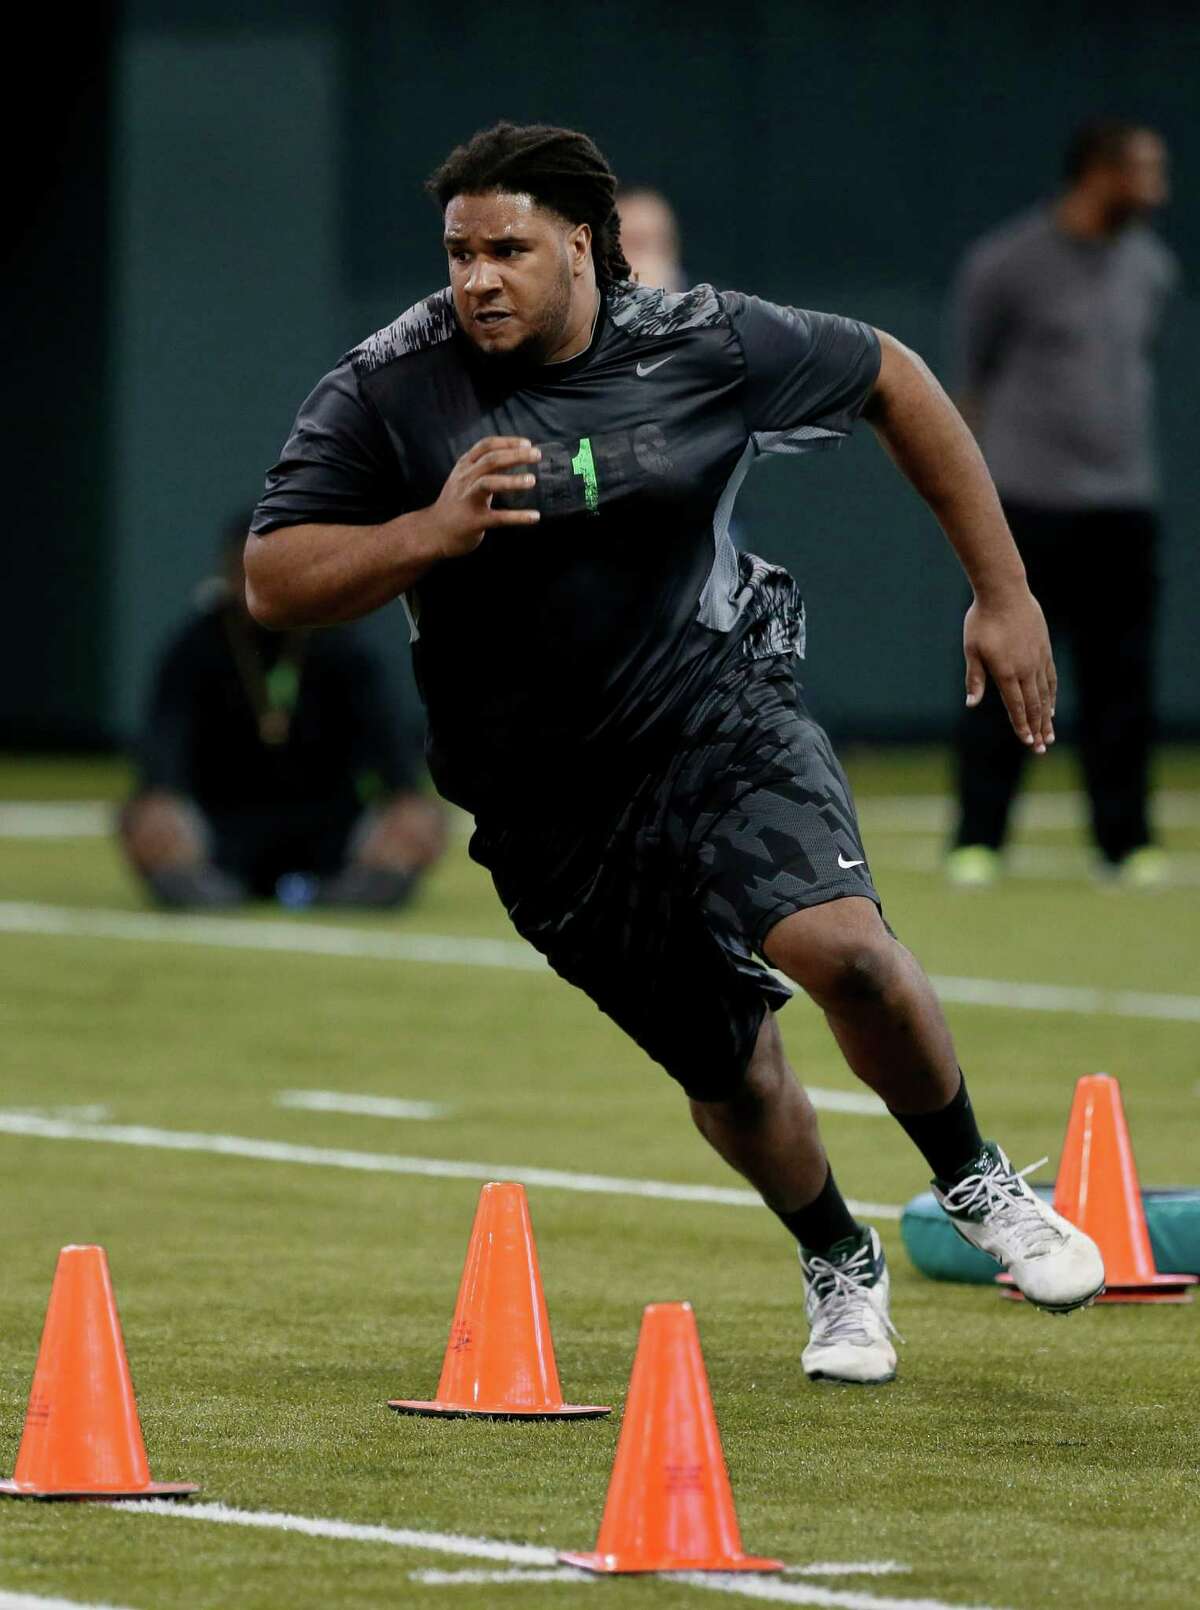 Offensive lineman Cyril Richardson, one of 18 players taking part in Baylor's pro day, runs the cone drill Wednesday.